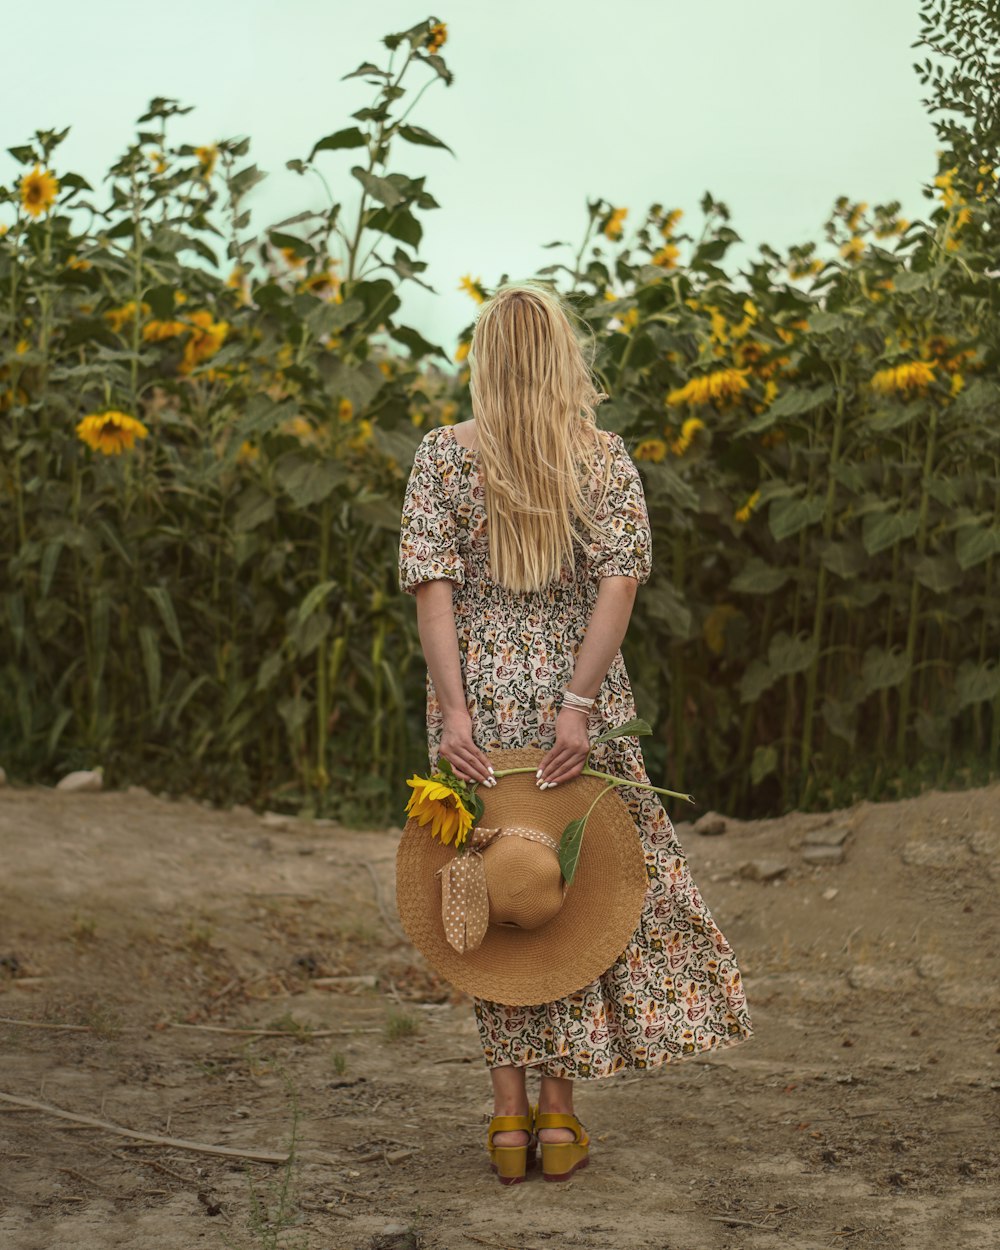 a woman in a dress and hat standing in a field of sunflowers